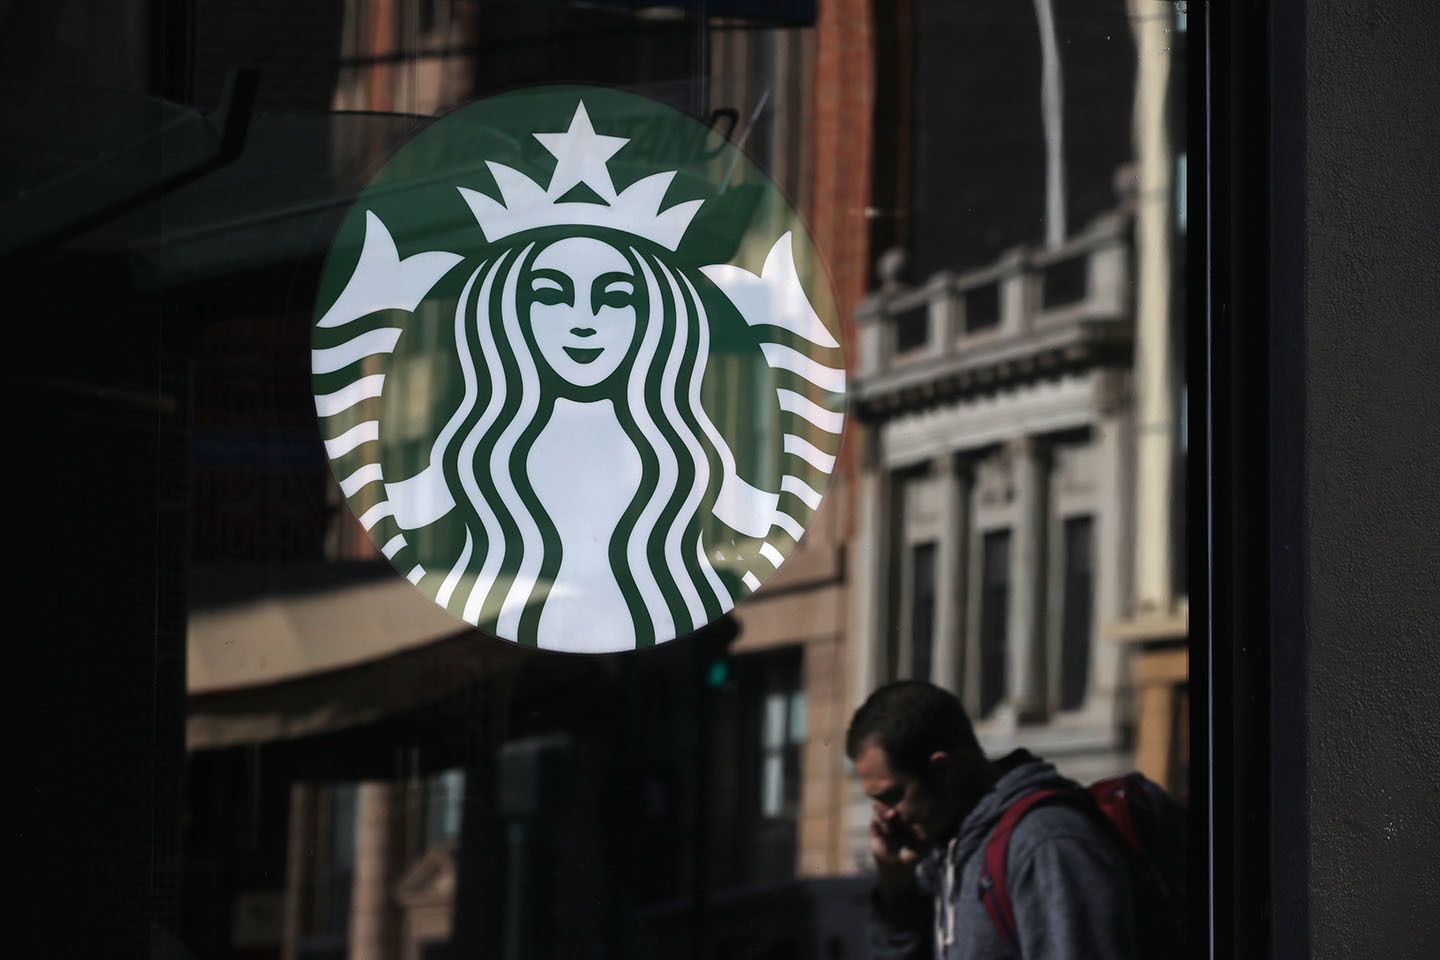 SAN FRANCISCO, CALIFORNIA - JANUARY 24: The Starbucks logo is displayed in the window of a Starbucks Coffee shop on January 24, 2019 in San Francisco, California. Starbucks will report first quarter earnings after today's closing bell. (Photo by Justin Sullivan/Getty Images)